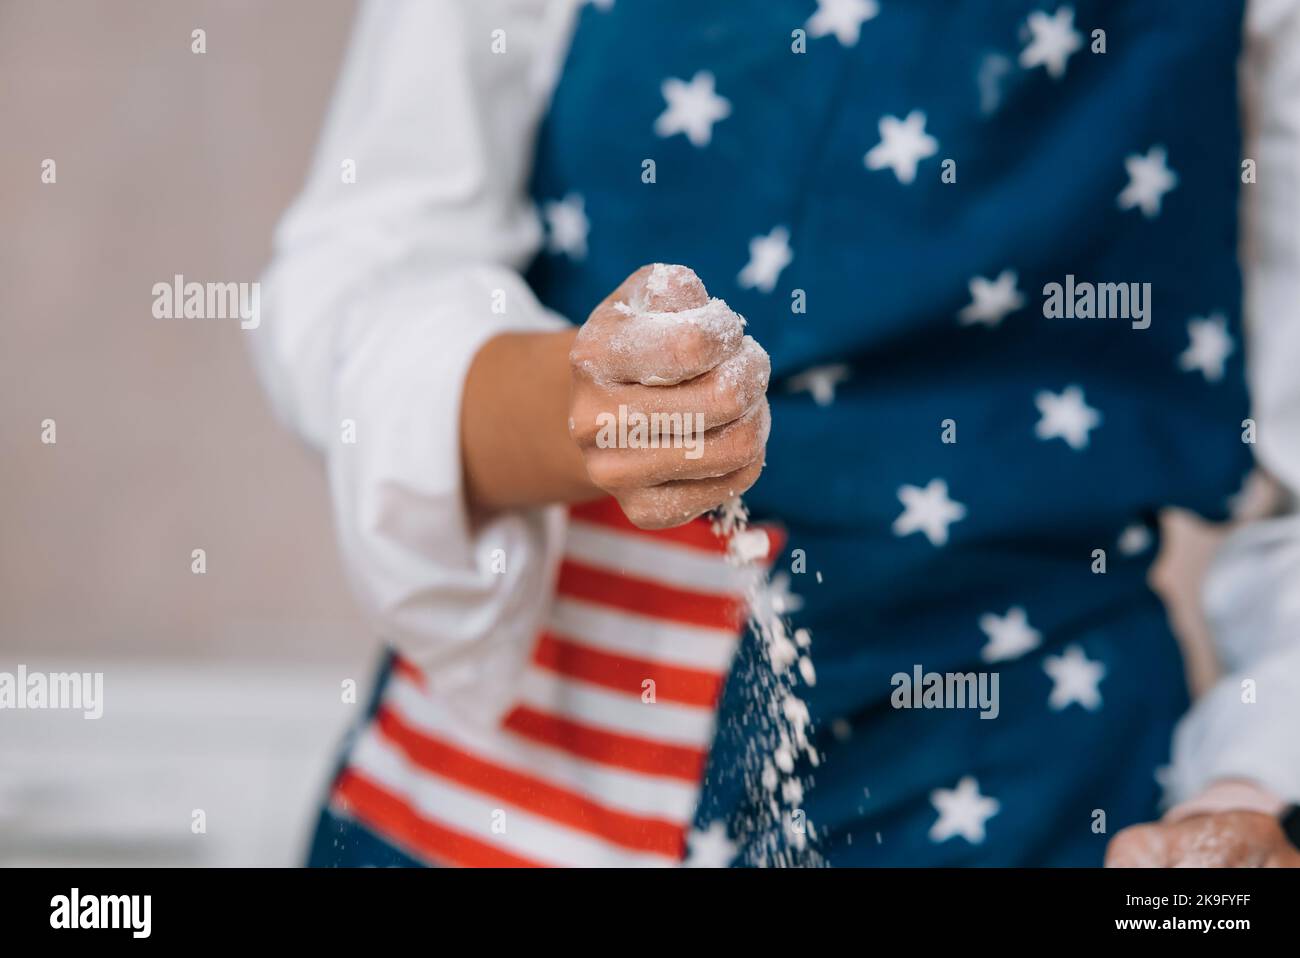 Young housewife in an apron kneads dough with her hands. Stock Photo